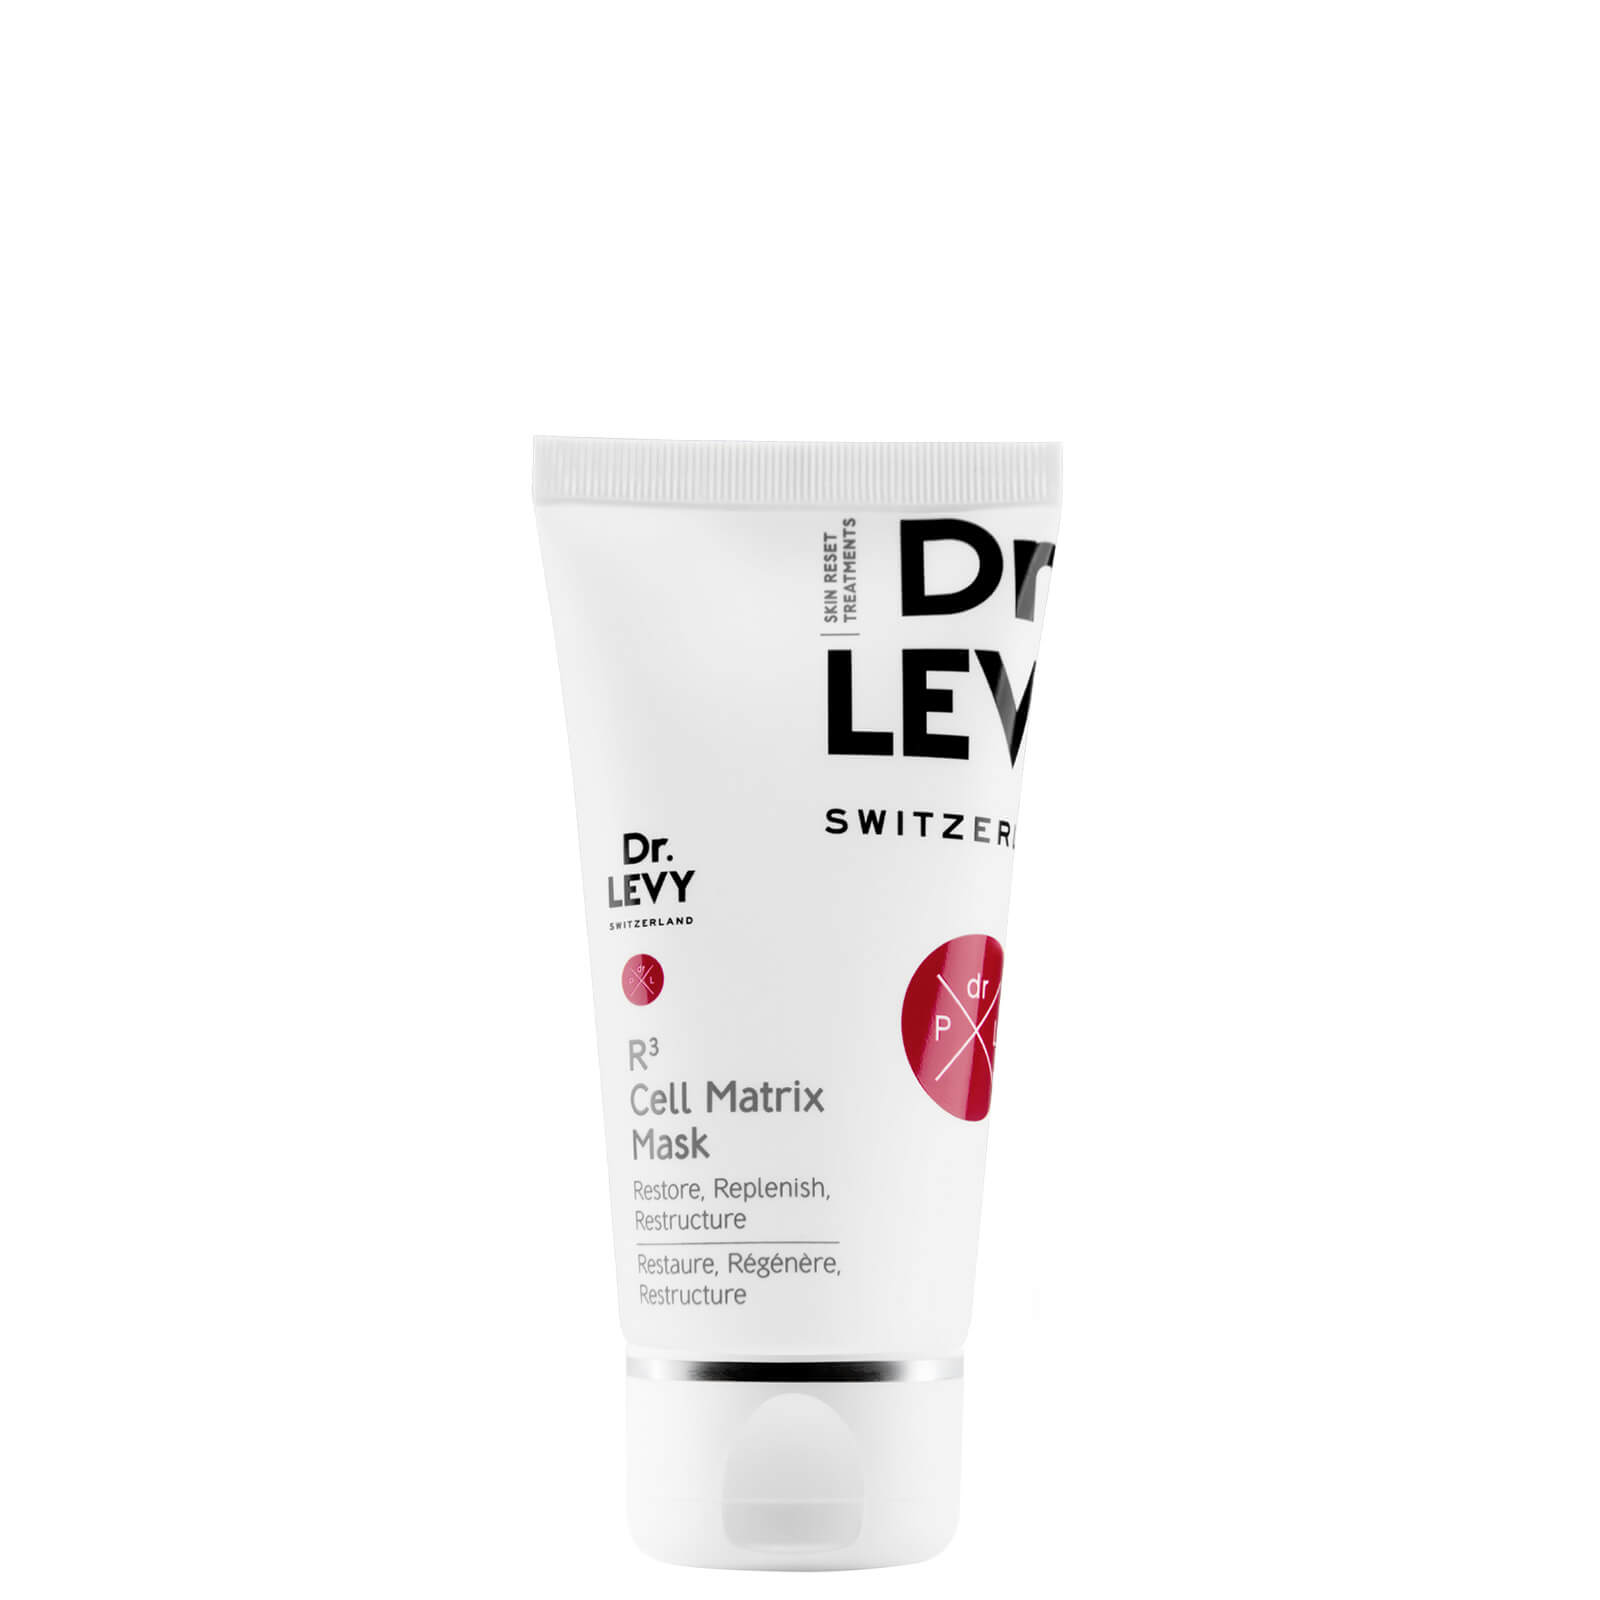 Image of Dr. Levy R3 Cell Matrix Mask 50ml